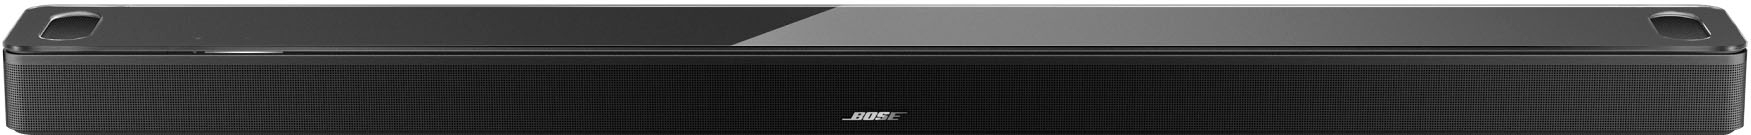 - 882963-1100 Black Bose Soundbar Voice Assistant Buy Best and with Atmos Smart Ultra Dolby